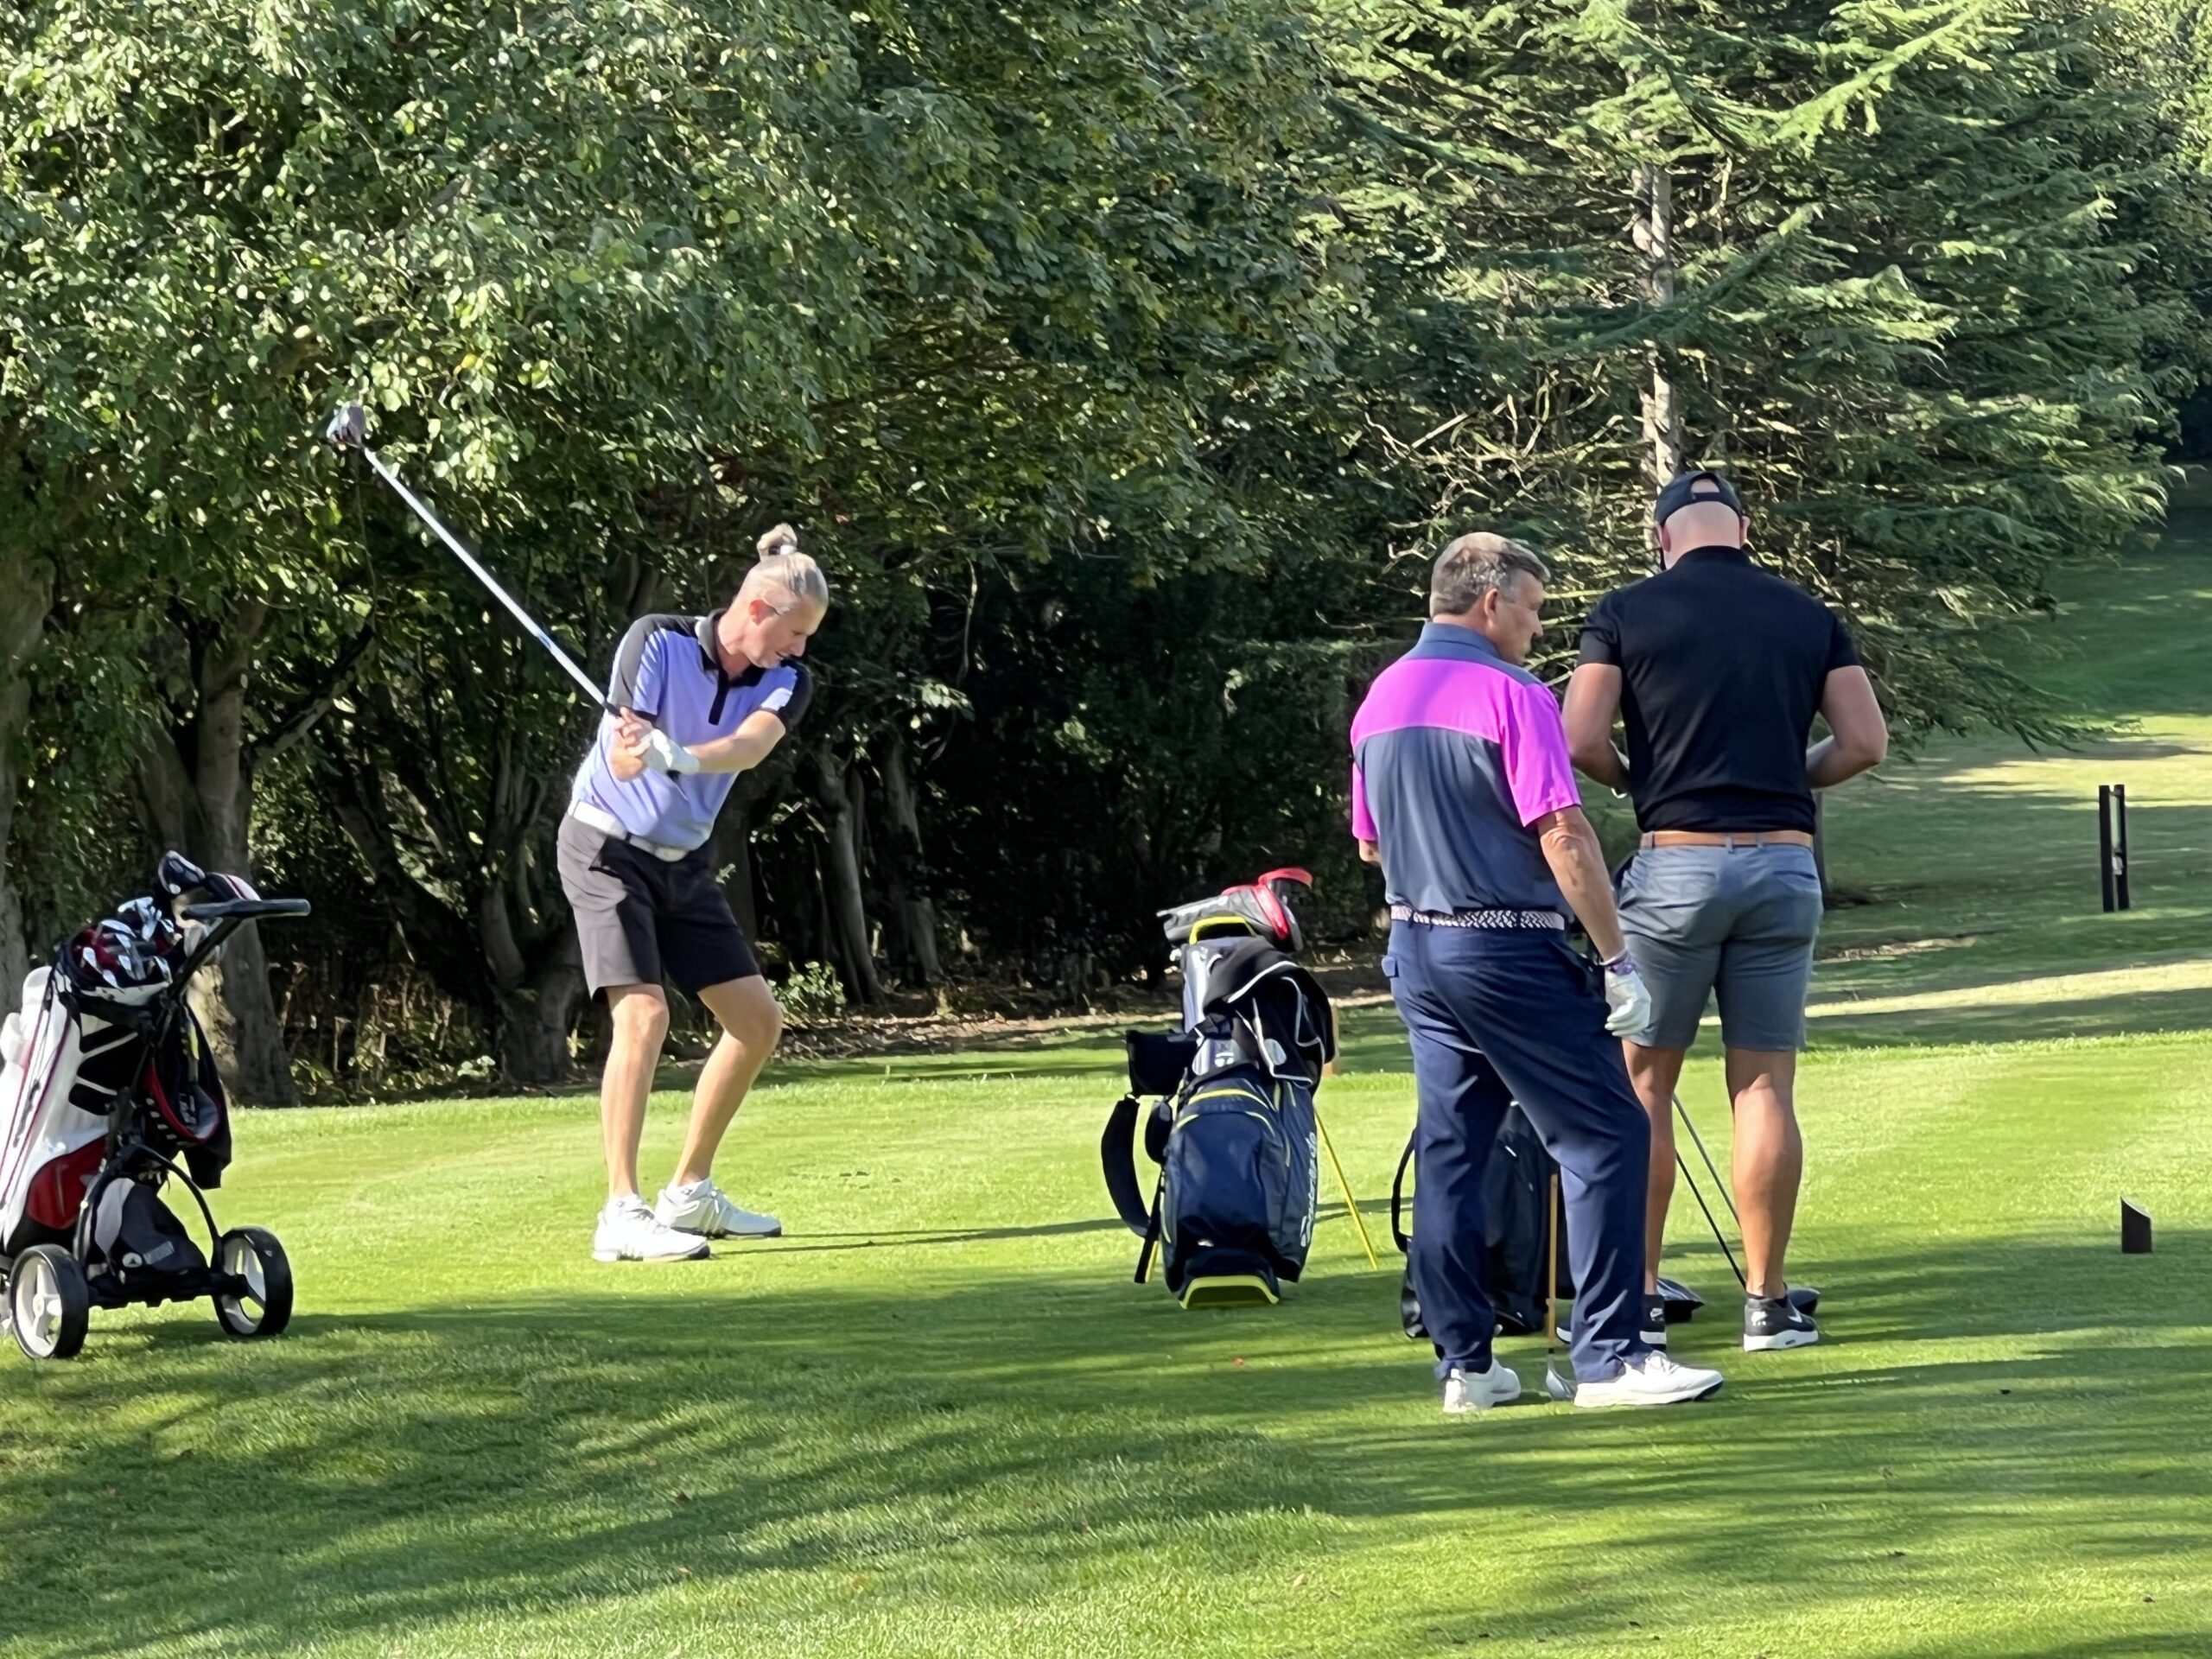 Beverley Building Society's Charity Golf Day 26 August 2022